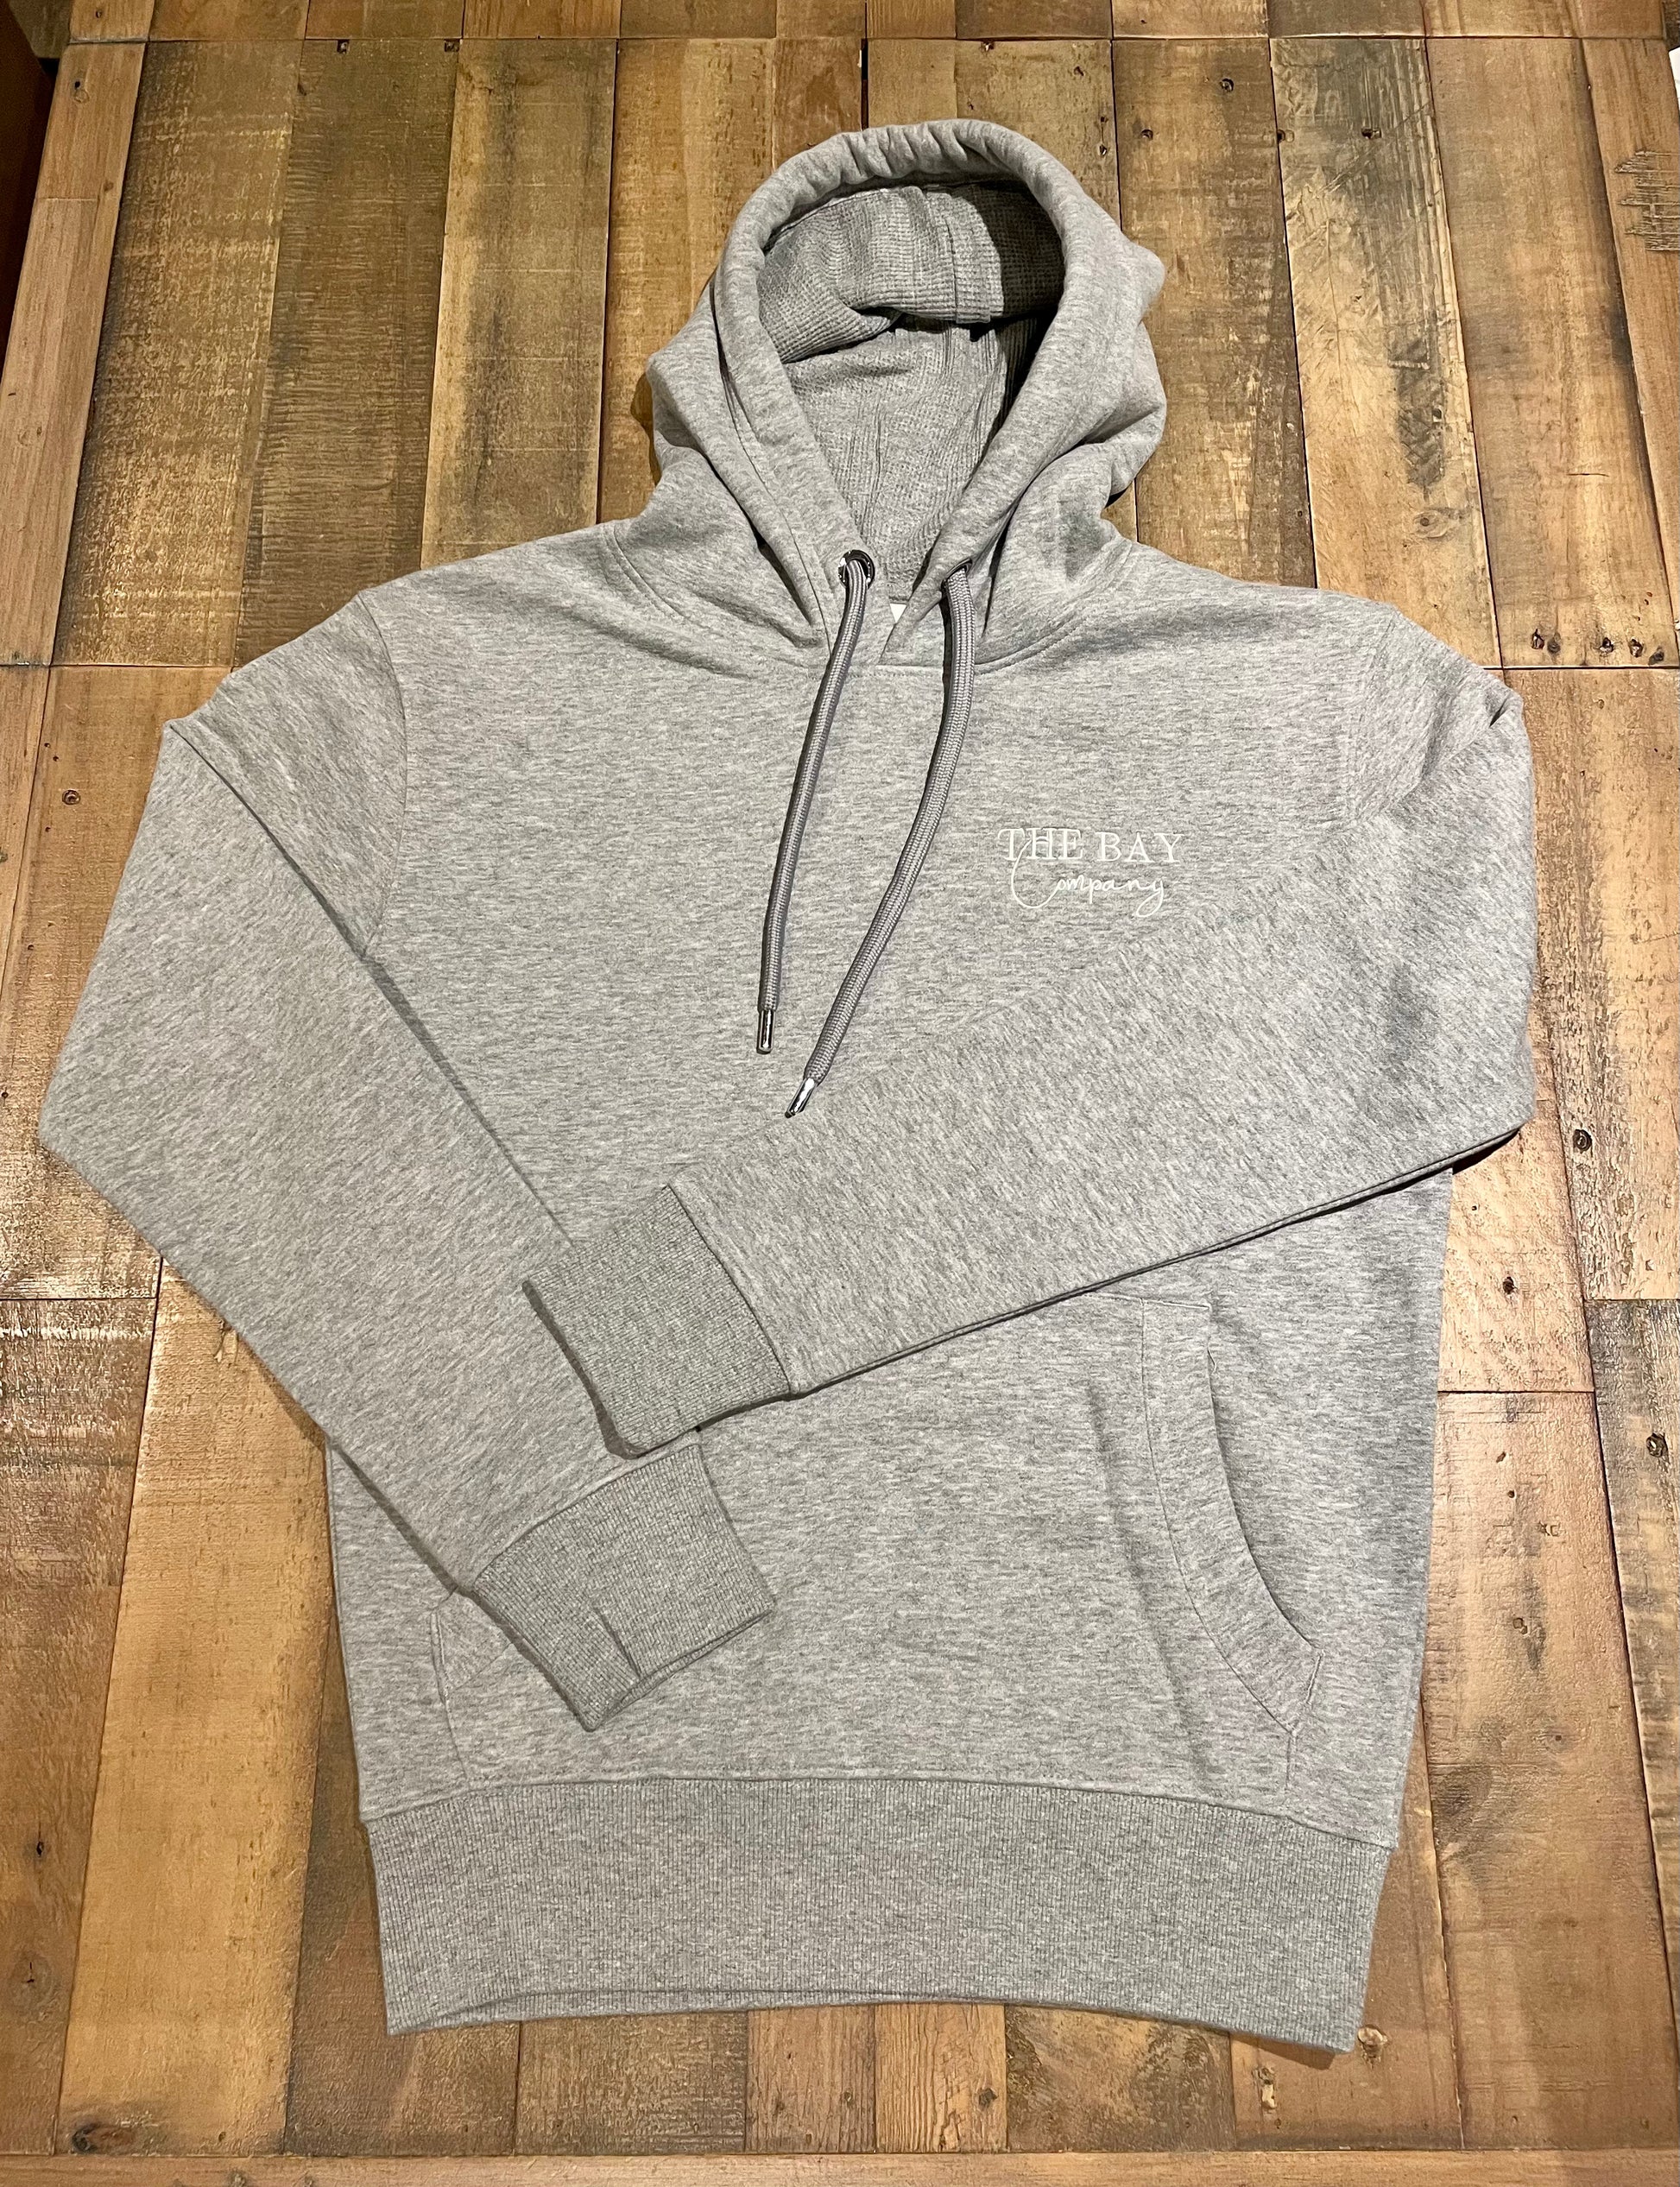 The grey “Robin Hood’s Bay” men’s hoodie from the bay company. 